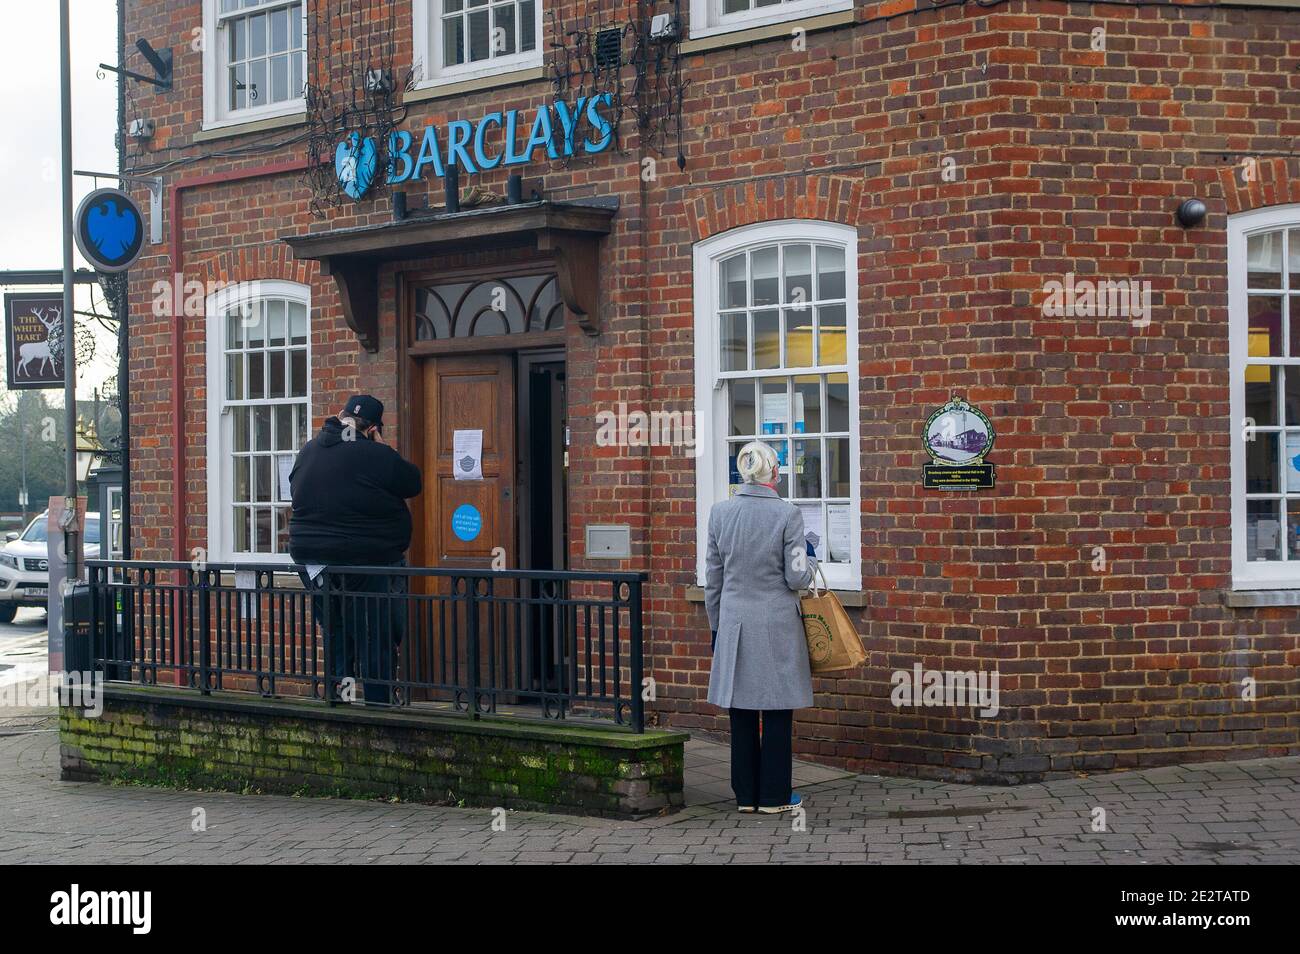 Chalfont St Peter, Buckinghamshire, UK. 15th January, 2021. People queue outside Barclays bank. It was a quiet morning in the village of Chalfont St Peter this morning as many people continue to stay at home following Government advice during the latest Covid-19 lockdown. Credit: Maureen McLean/Alamy Live News Stock Photo